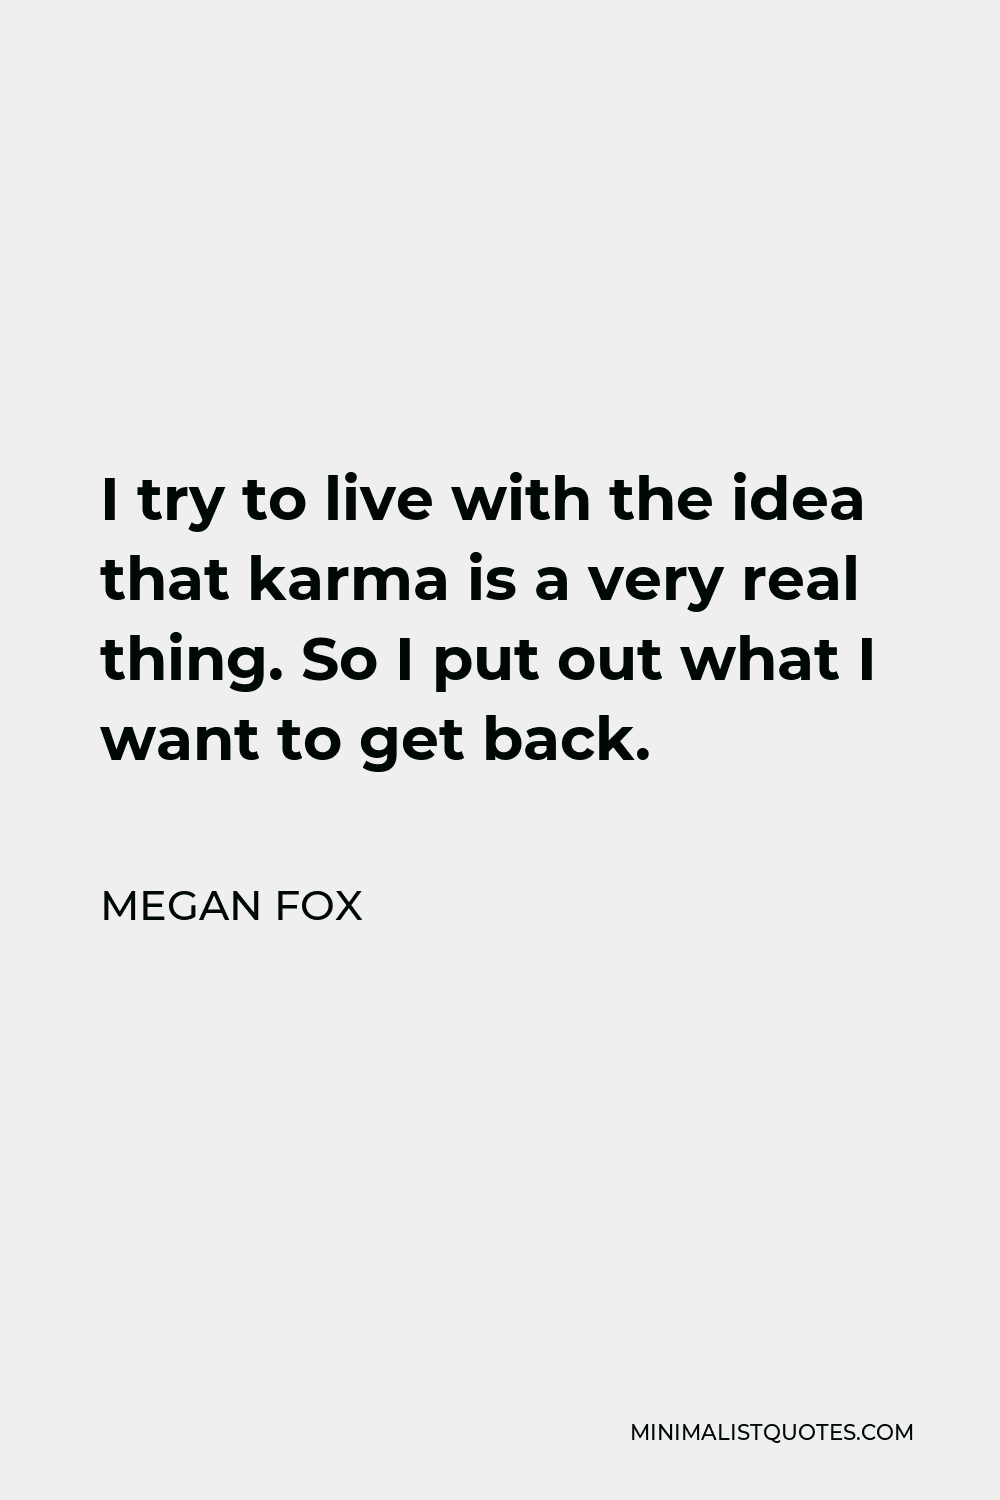 Megan Fox Quote - I try to live with the idea that karma is a very real thing. So I put out what I want to get back.